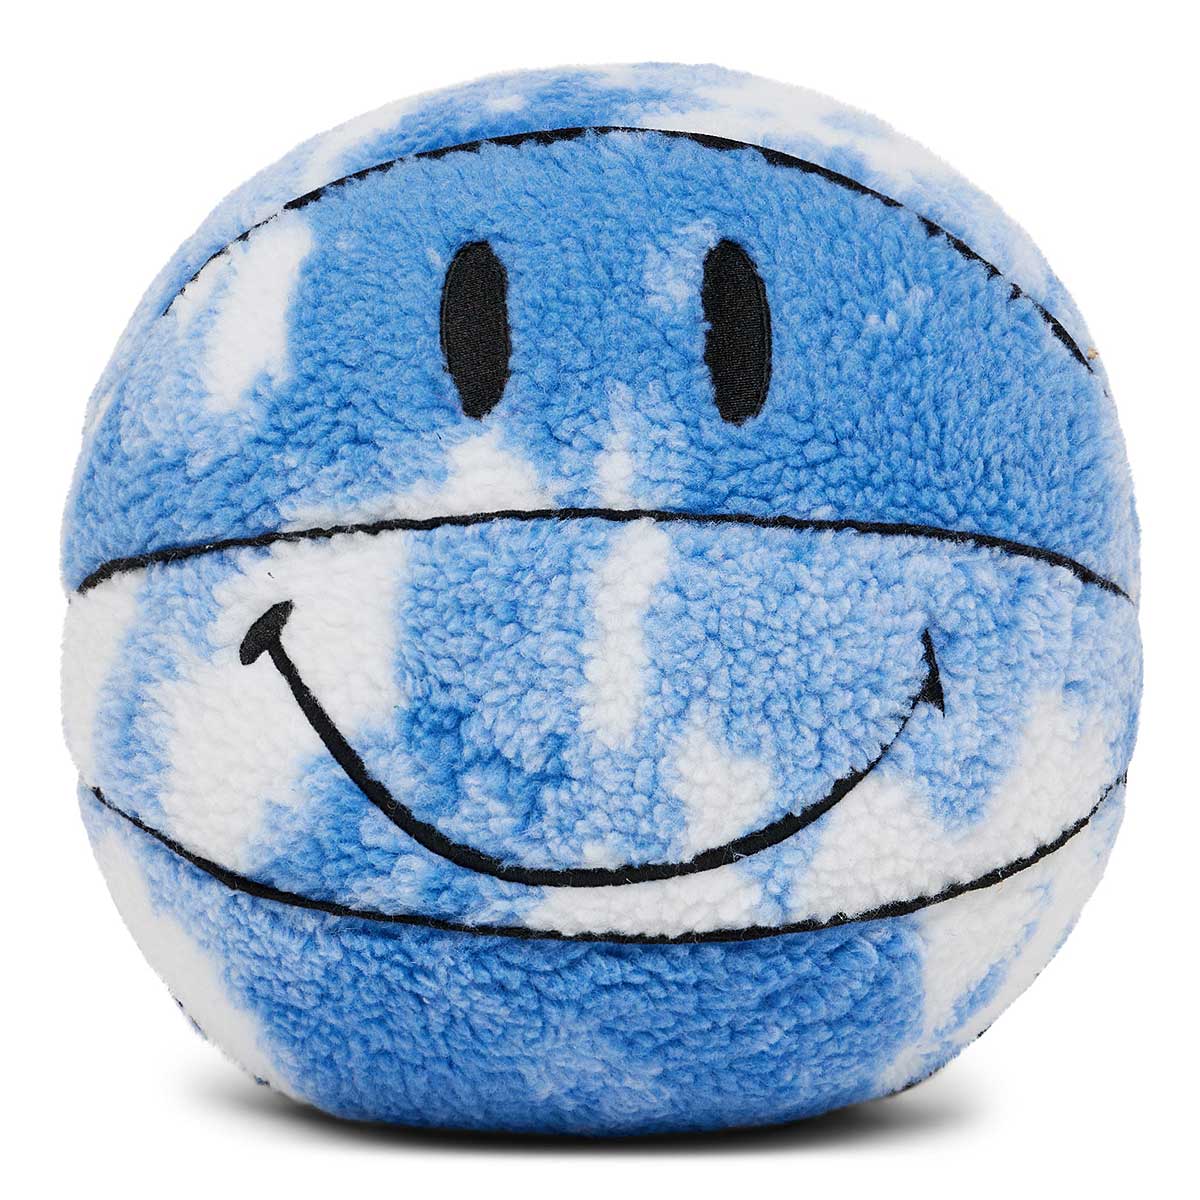 Market Smiley Market In The Clouds Plush Basketball, Multi